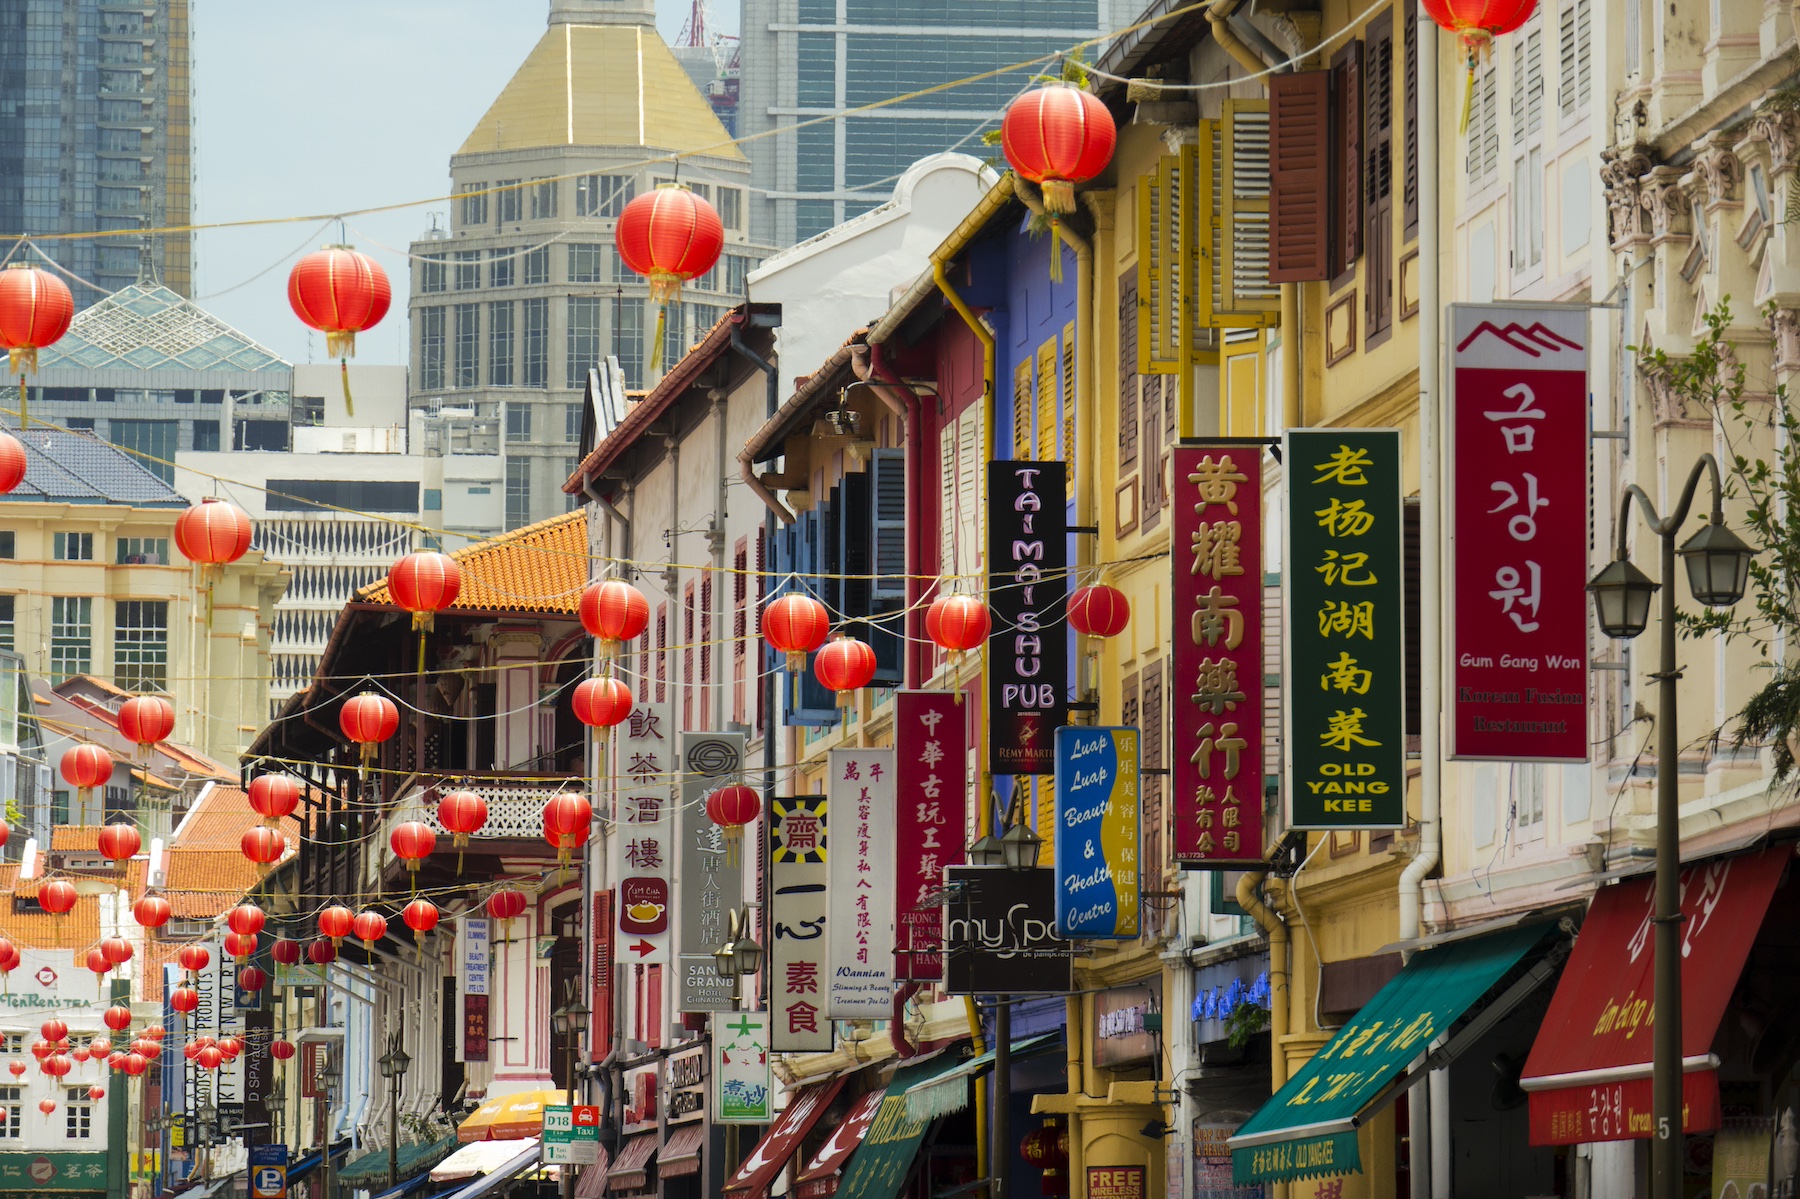 A street in Singapore's Chinatown lined with signs in Chinese and red paper lanterns